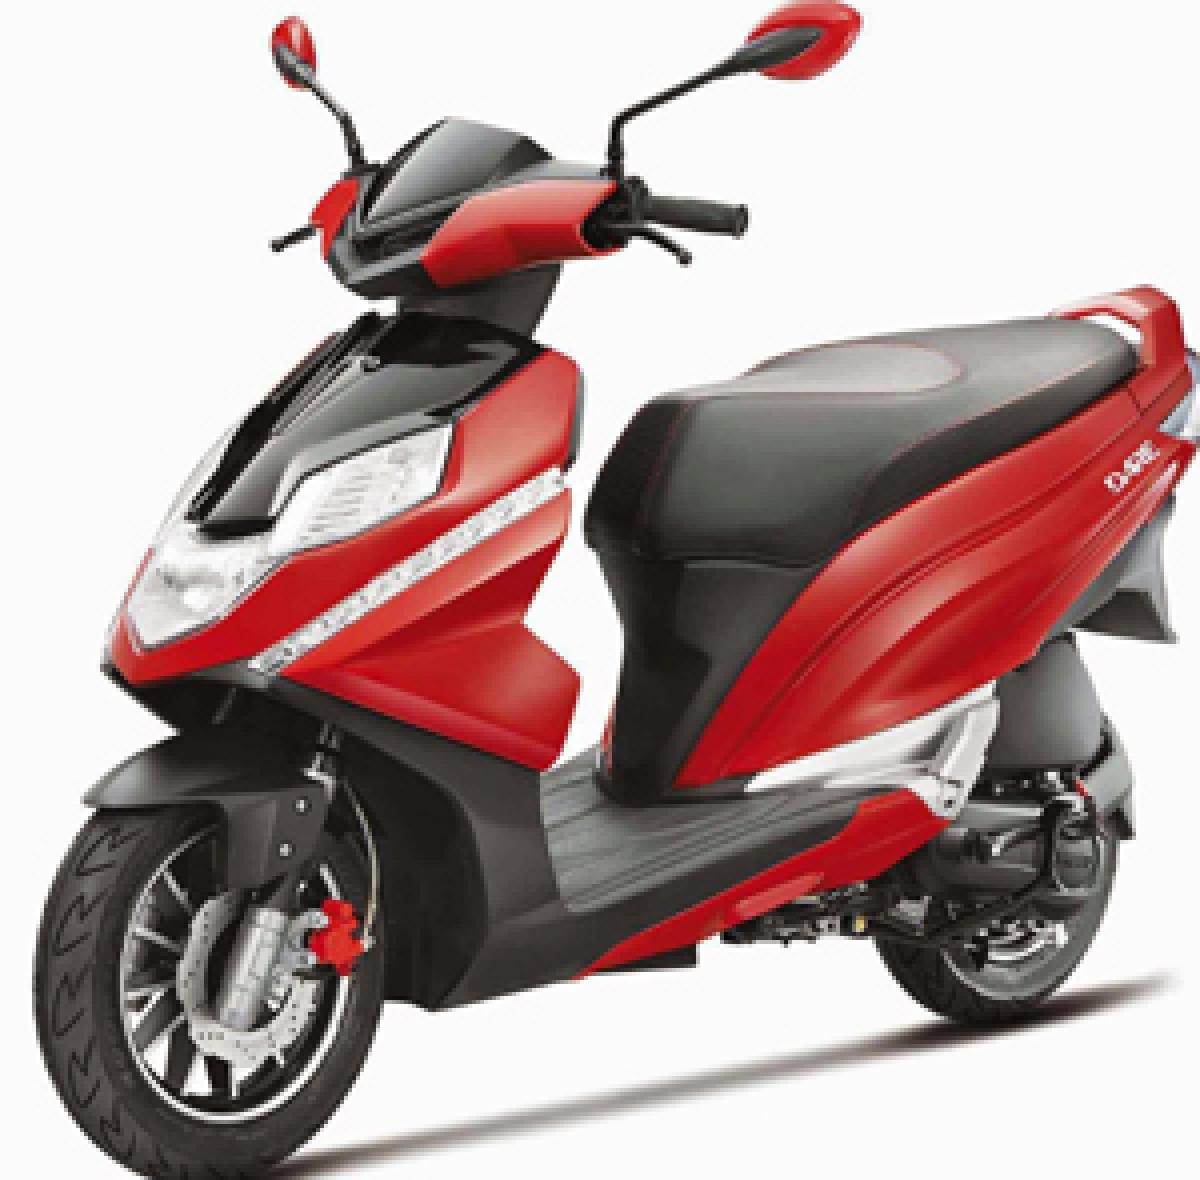 Hero Dash 110 and Dare 125 Scooters launching this festive season